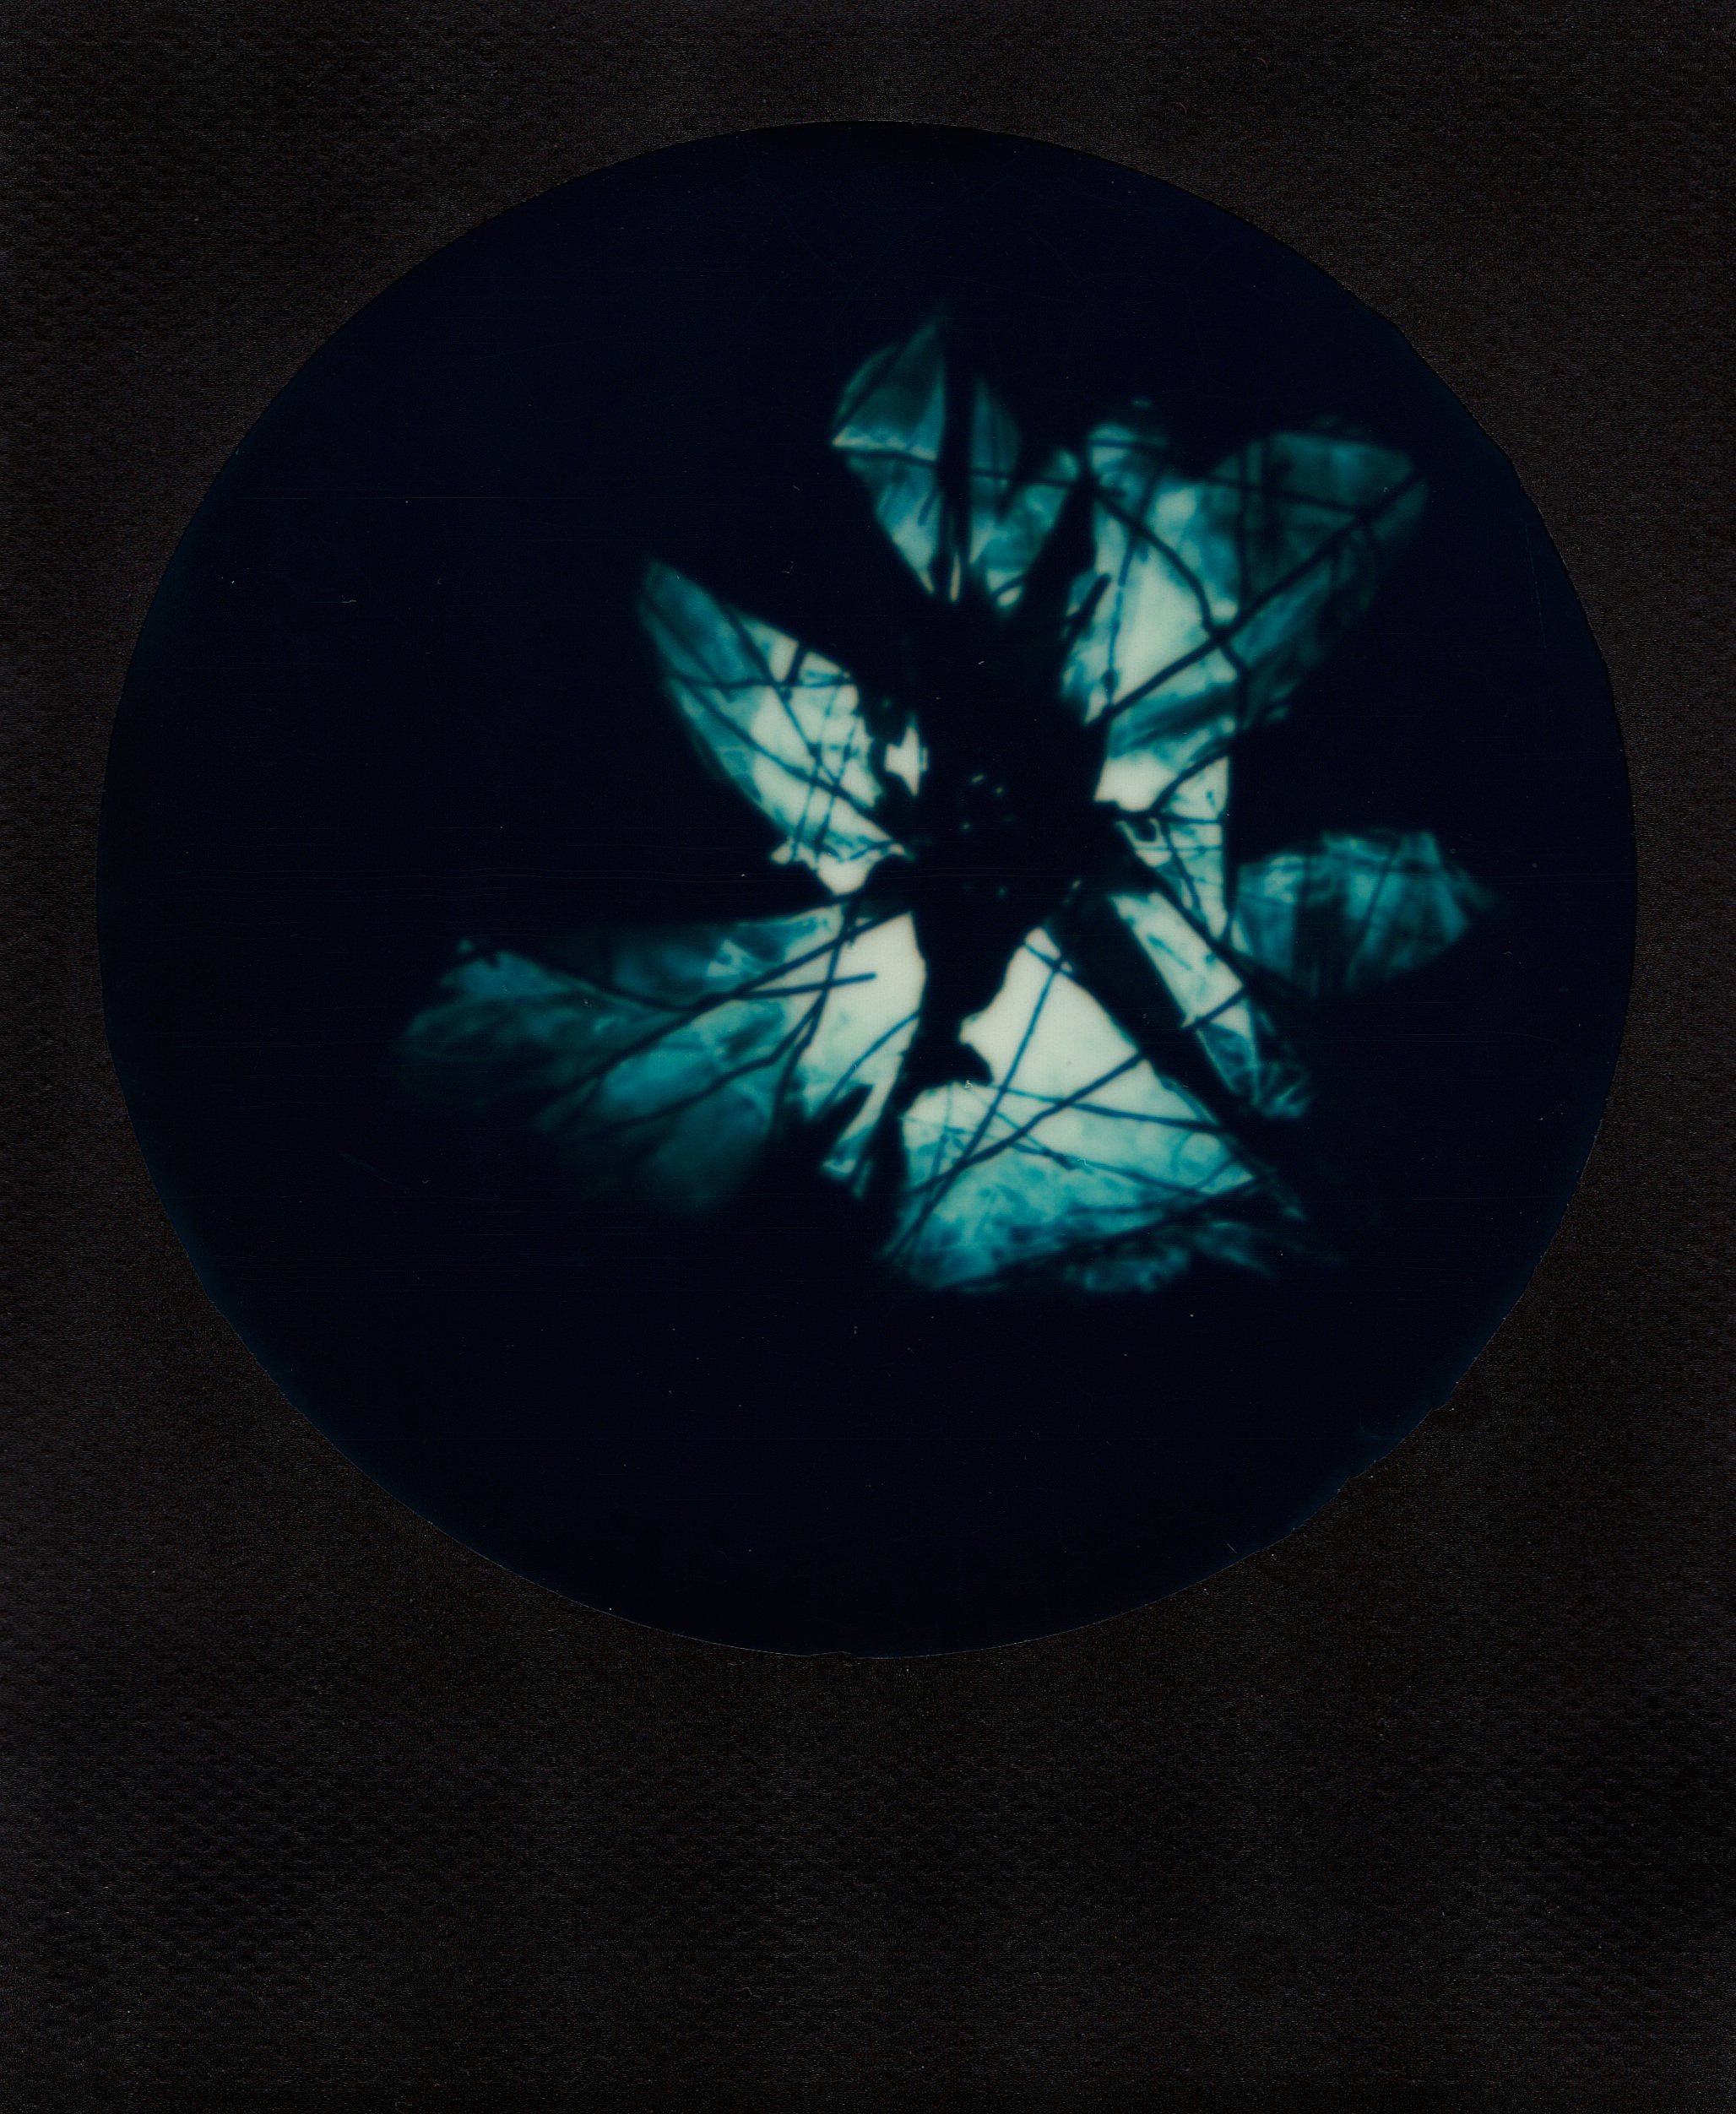 Alive | Polaroid Sun 660AF | Impossible Project Color 600 Film (Expired) | A Language Abstracted | Ioana Taut 